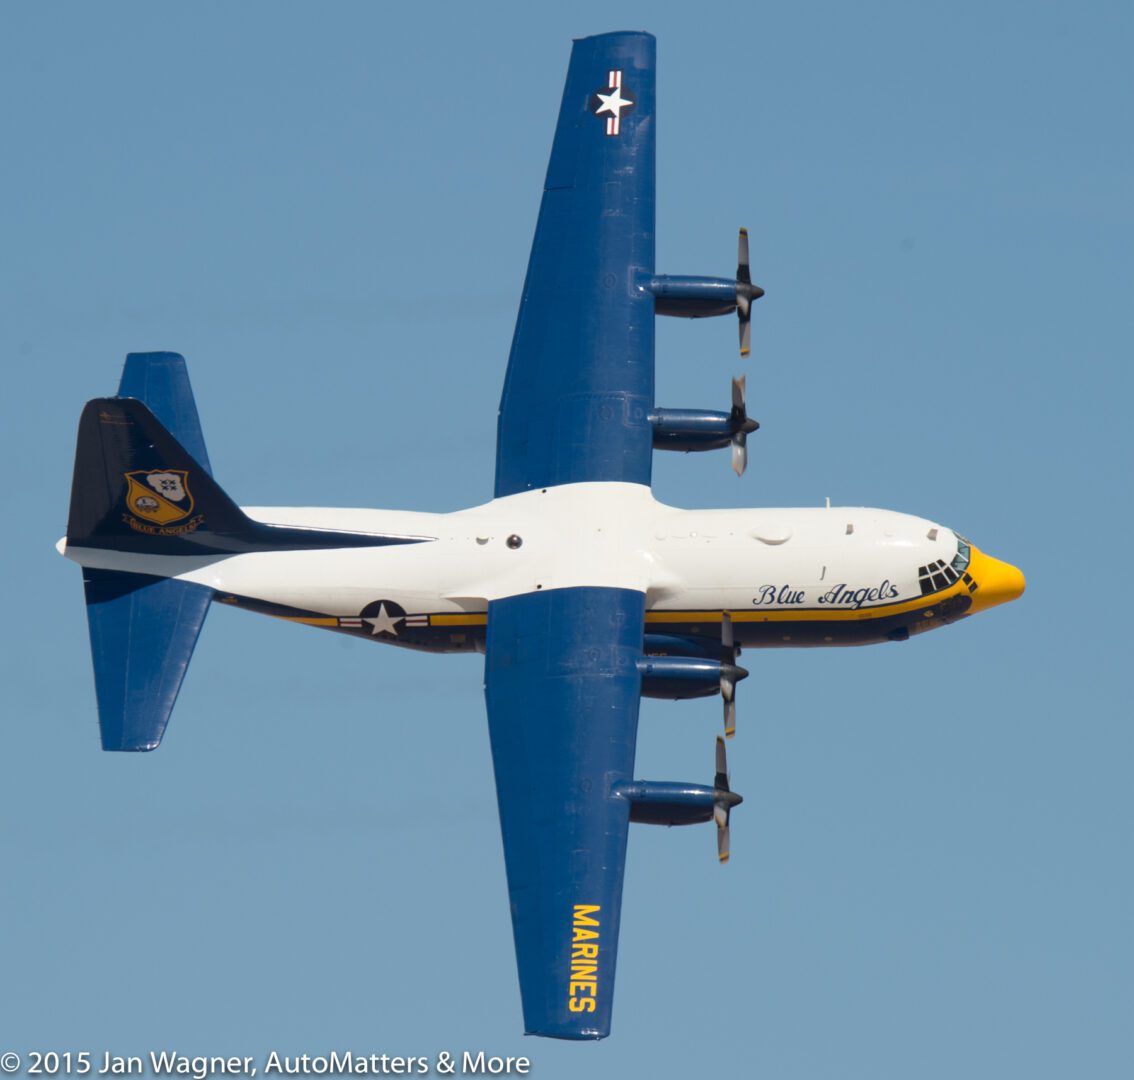 The Blue Angels plane